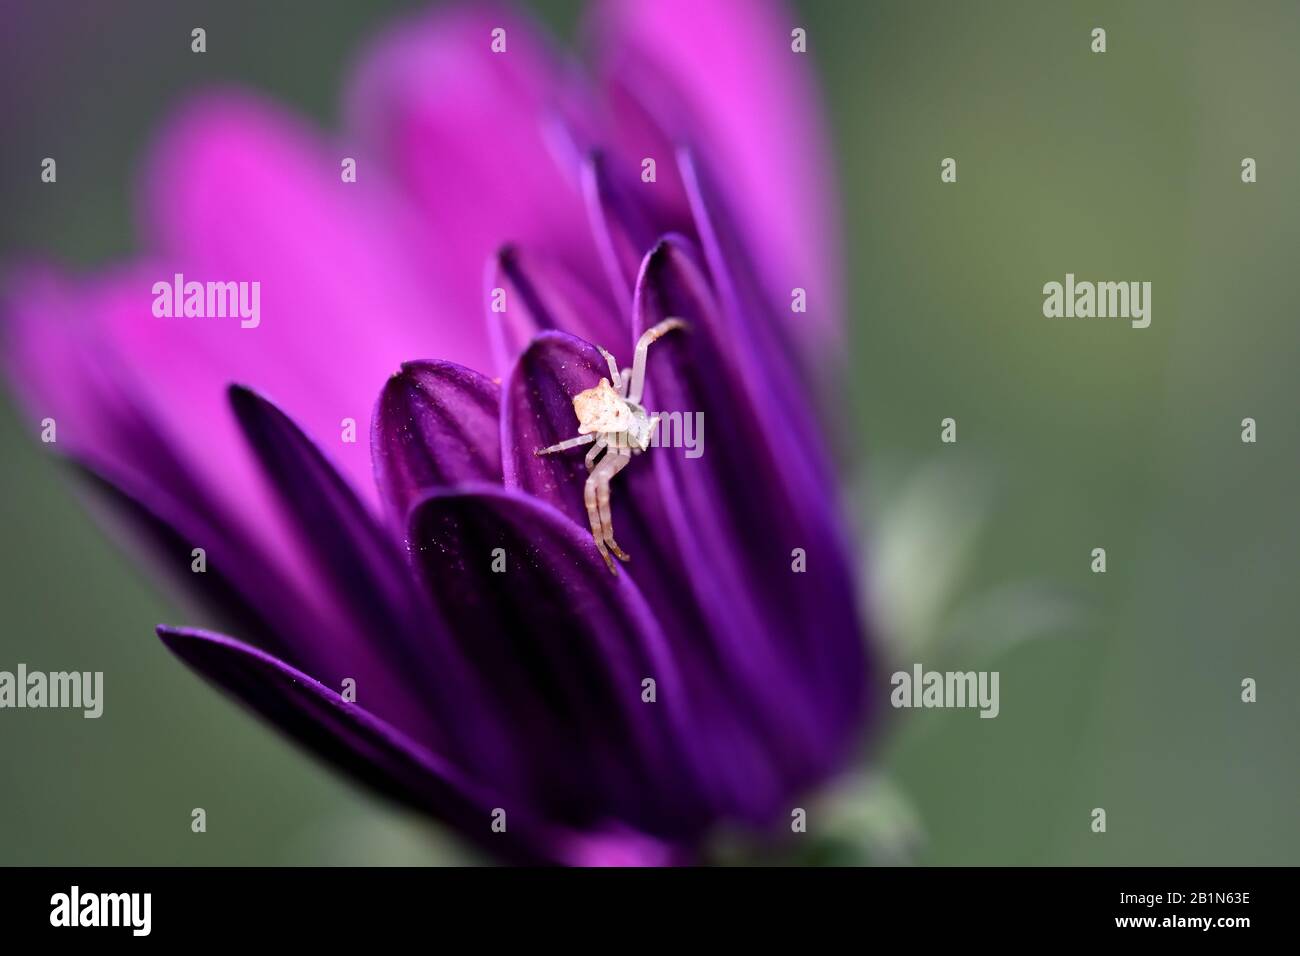 Purple flower detail with a small white crab spider Stock Photo